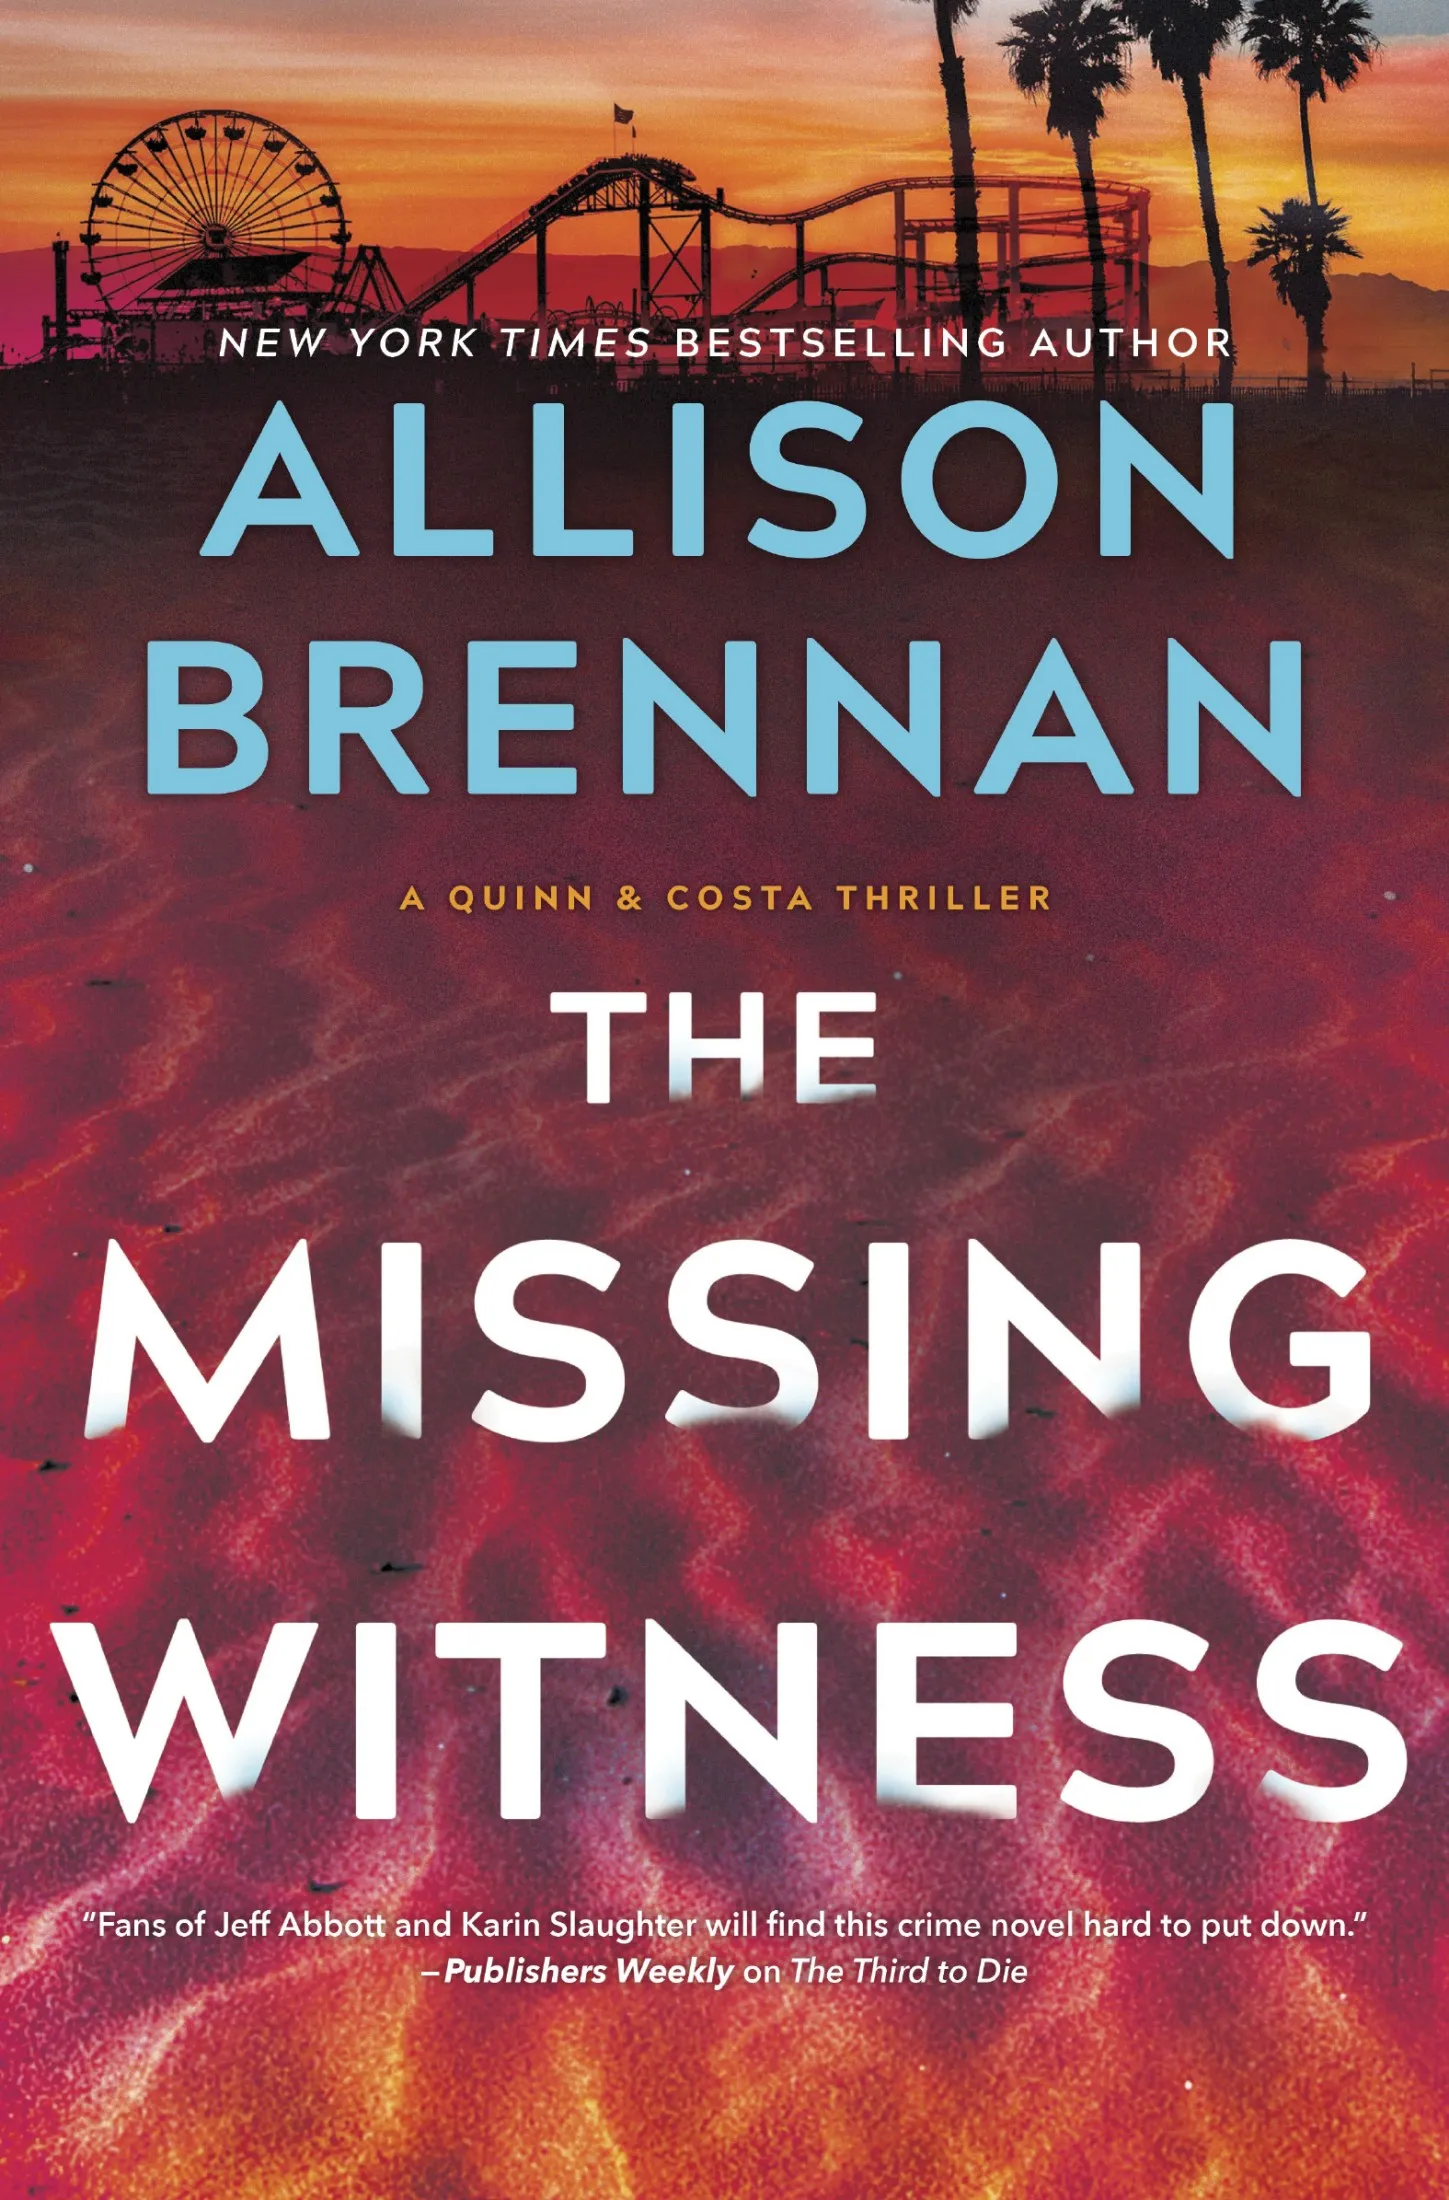 The Missing Witness (A Quinn & Costa Thriller #5)